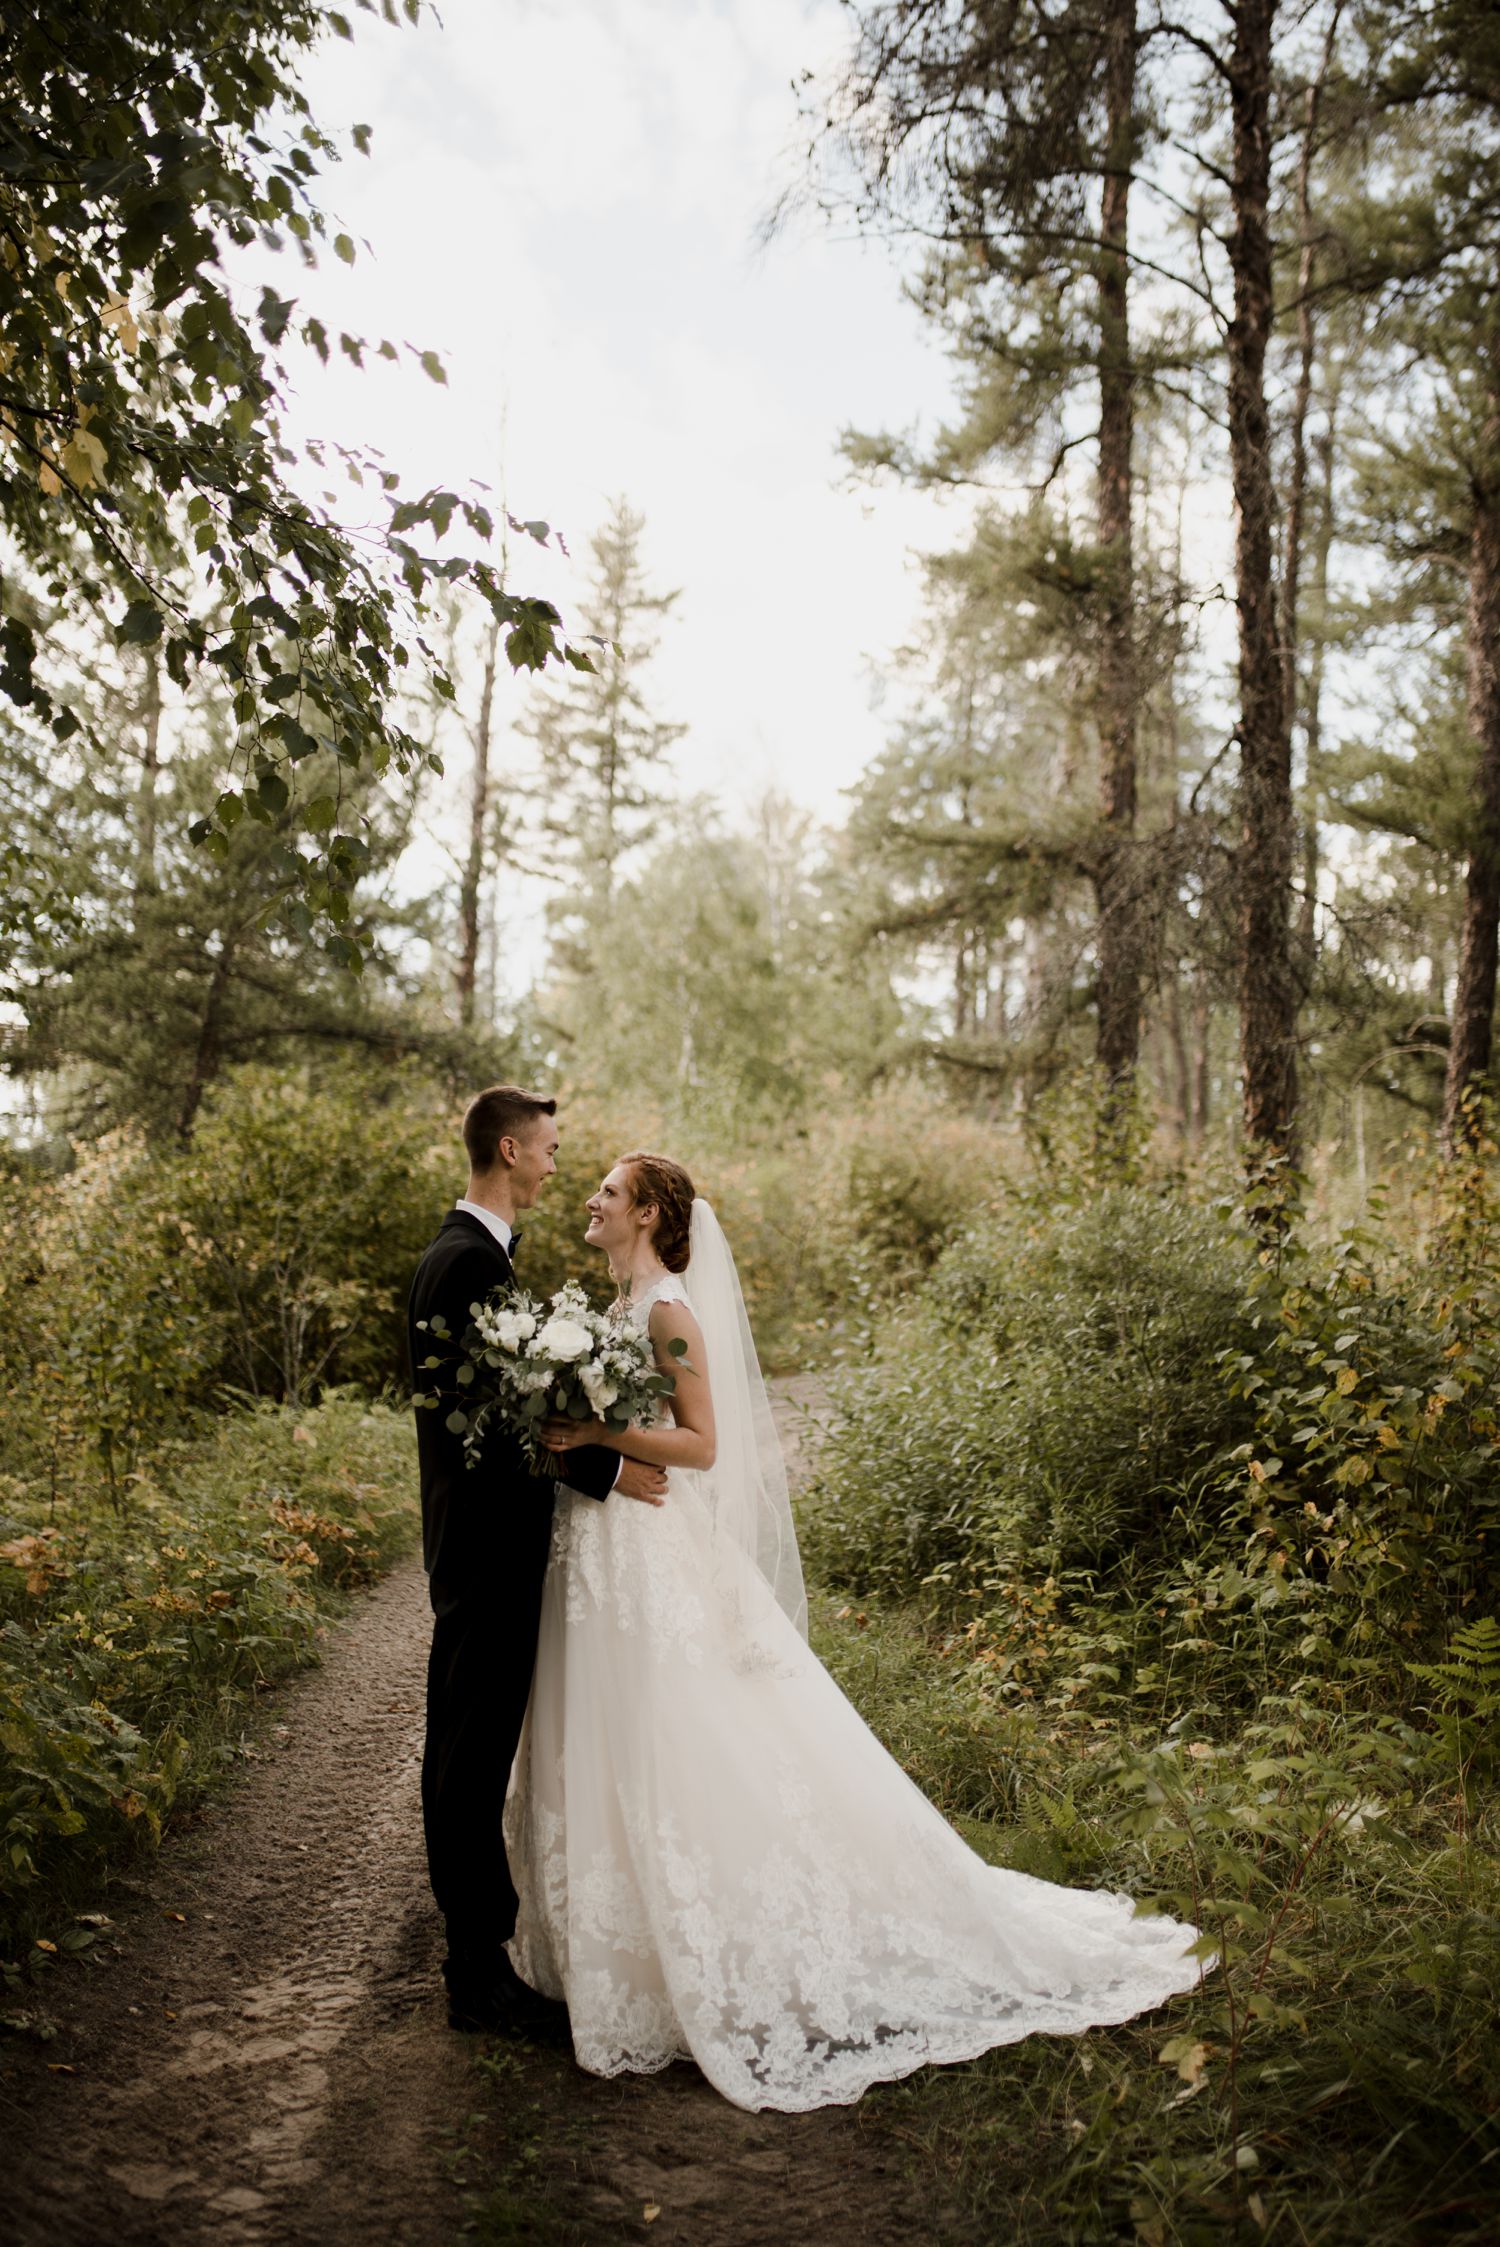 Steinbach church wedding, bride and groom portraits in Sandilands Manitoba. Photographed by Vanessa Renae Photography, a winnipeg wedding photographer and Canadian elopement photographer